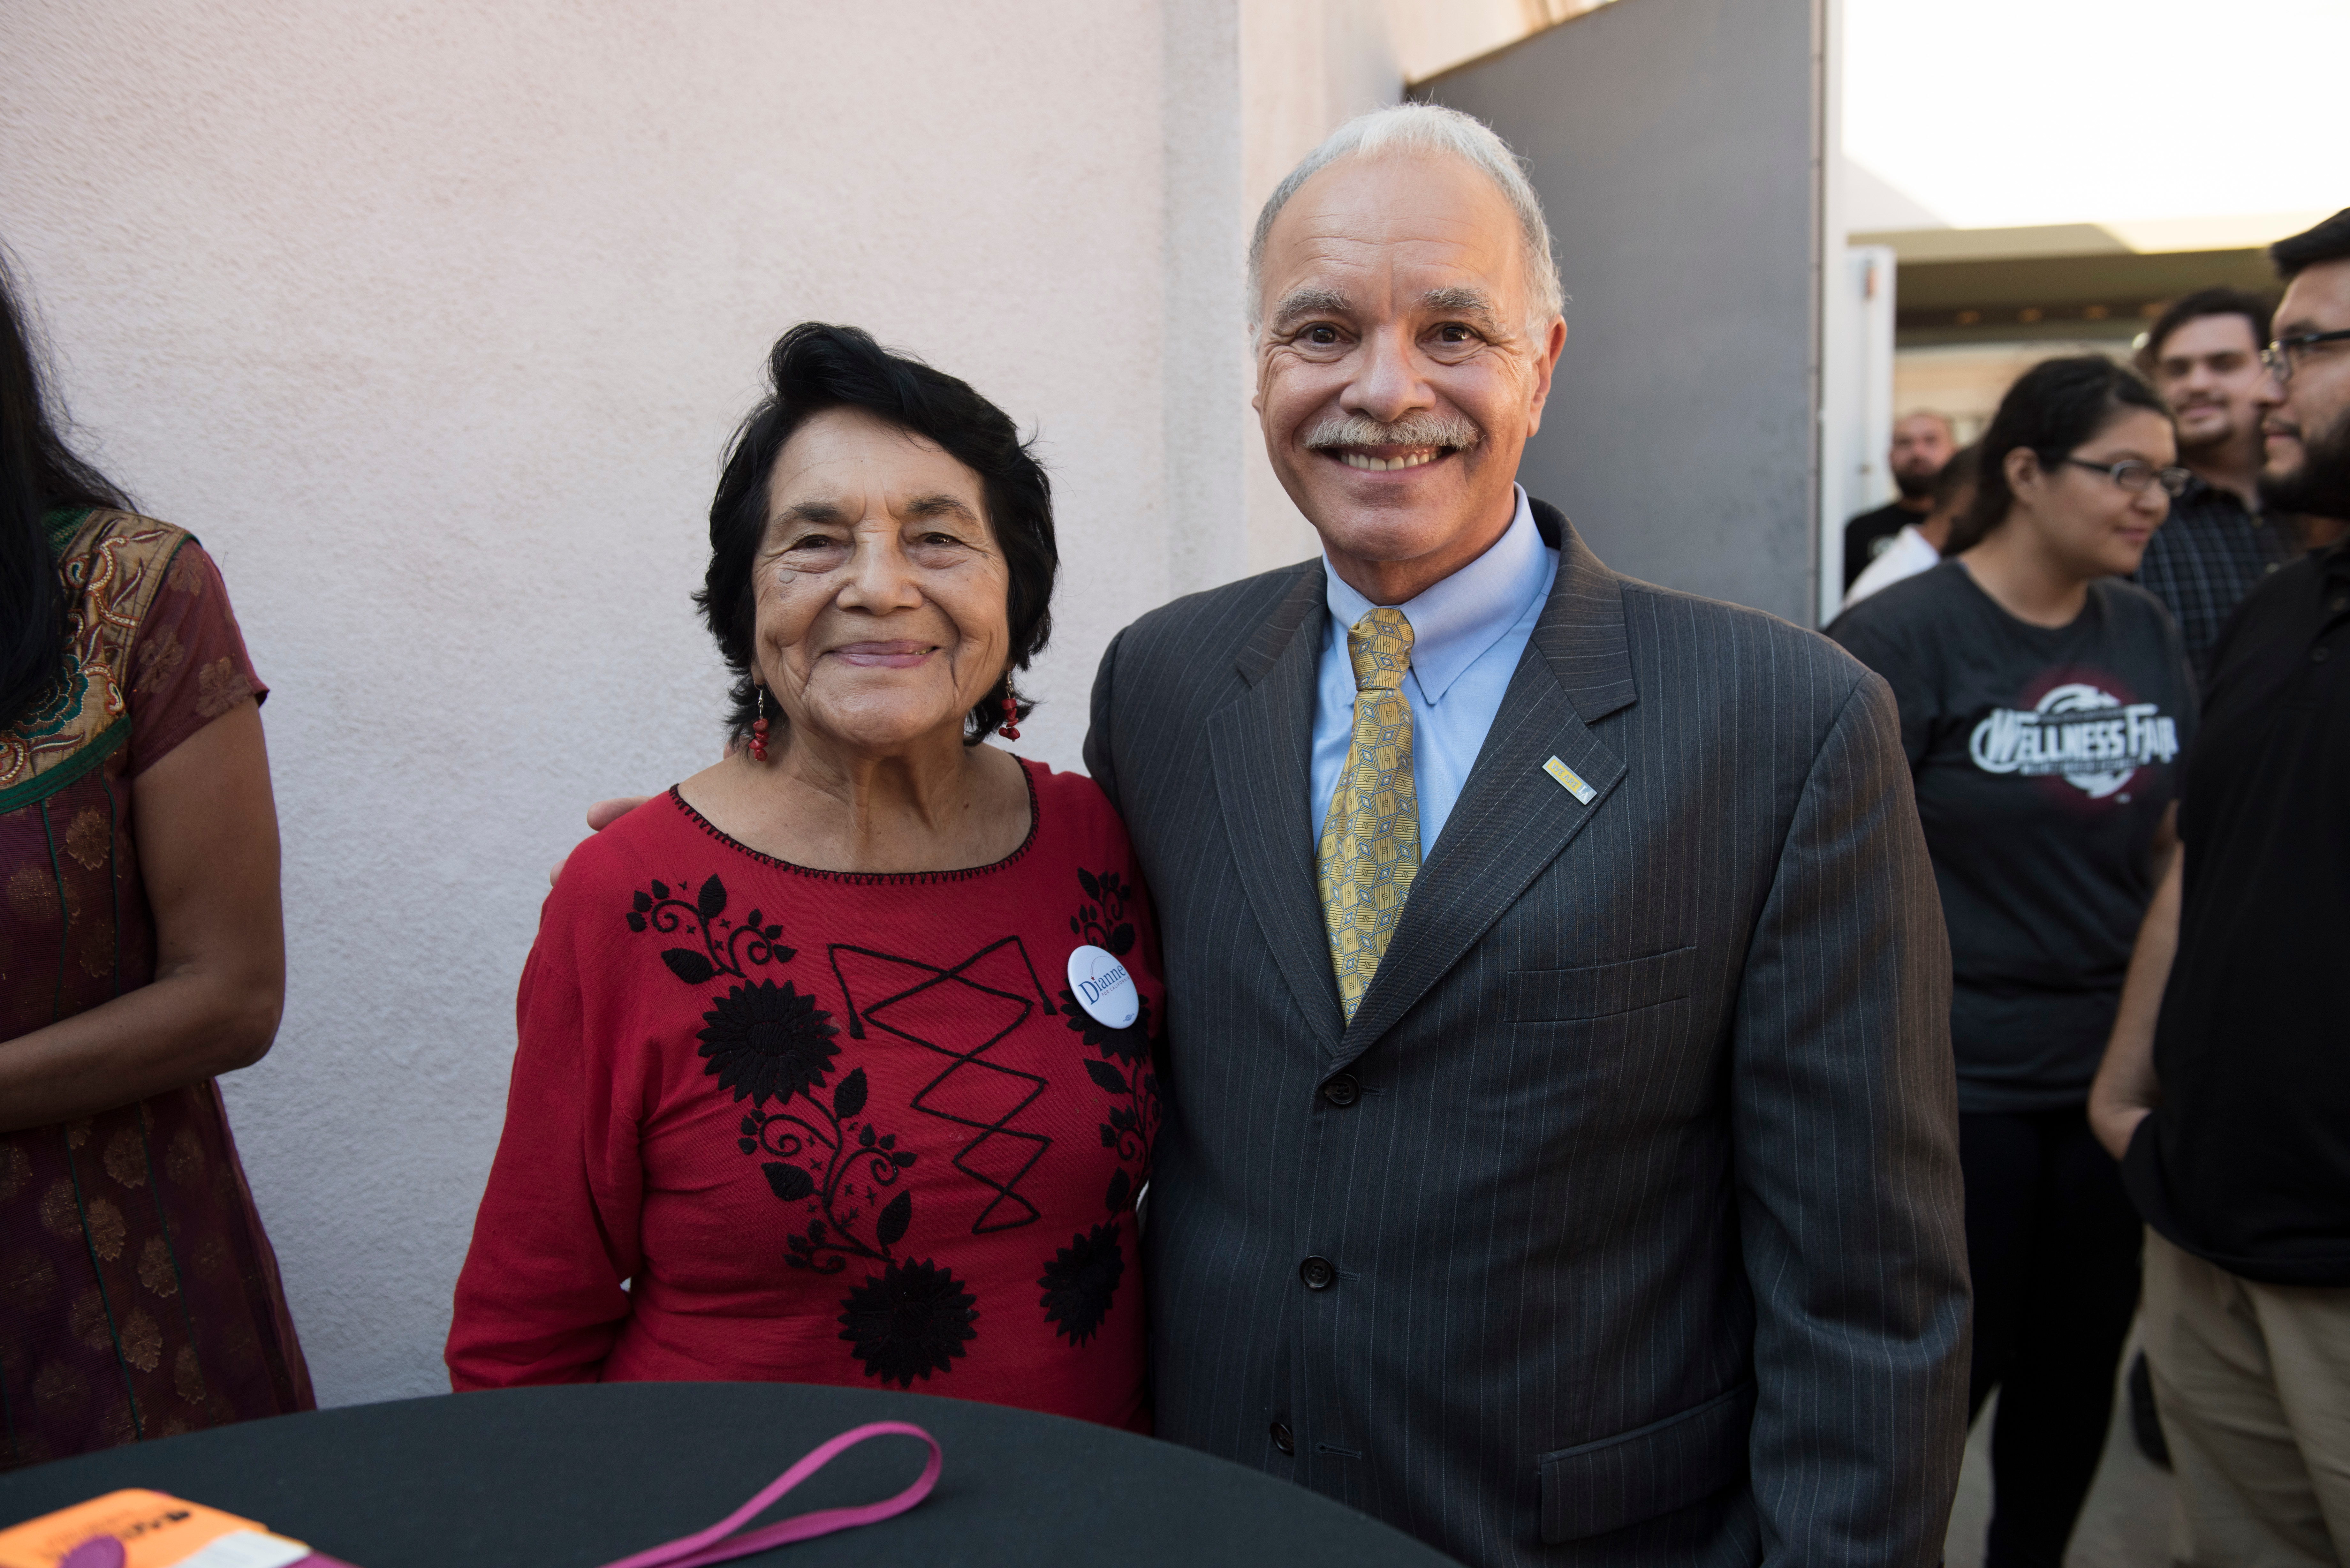 Dolores Huerta and President Covino at an afternoon reception.